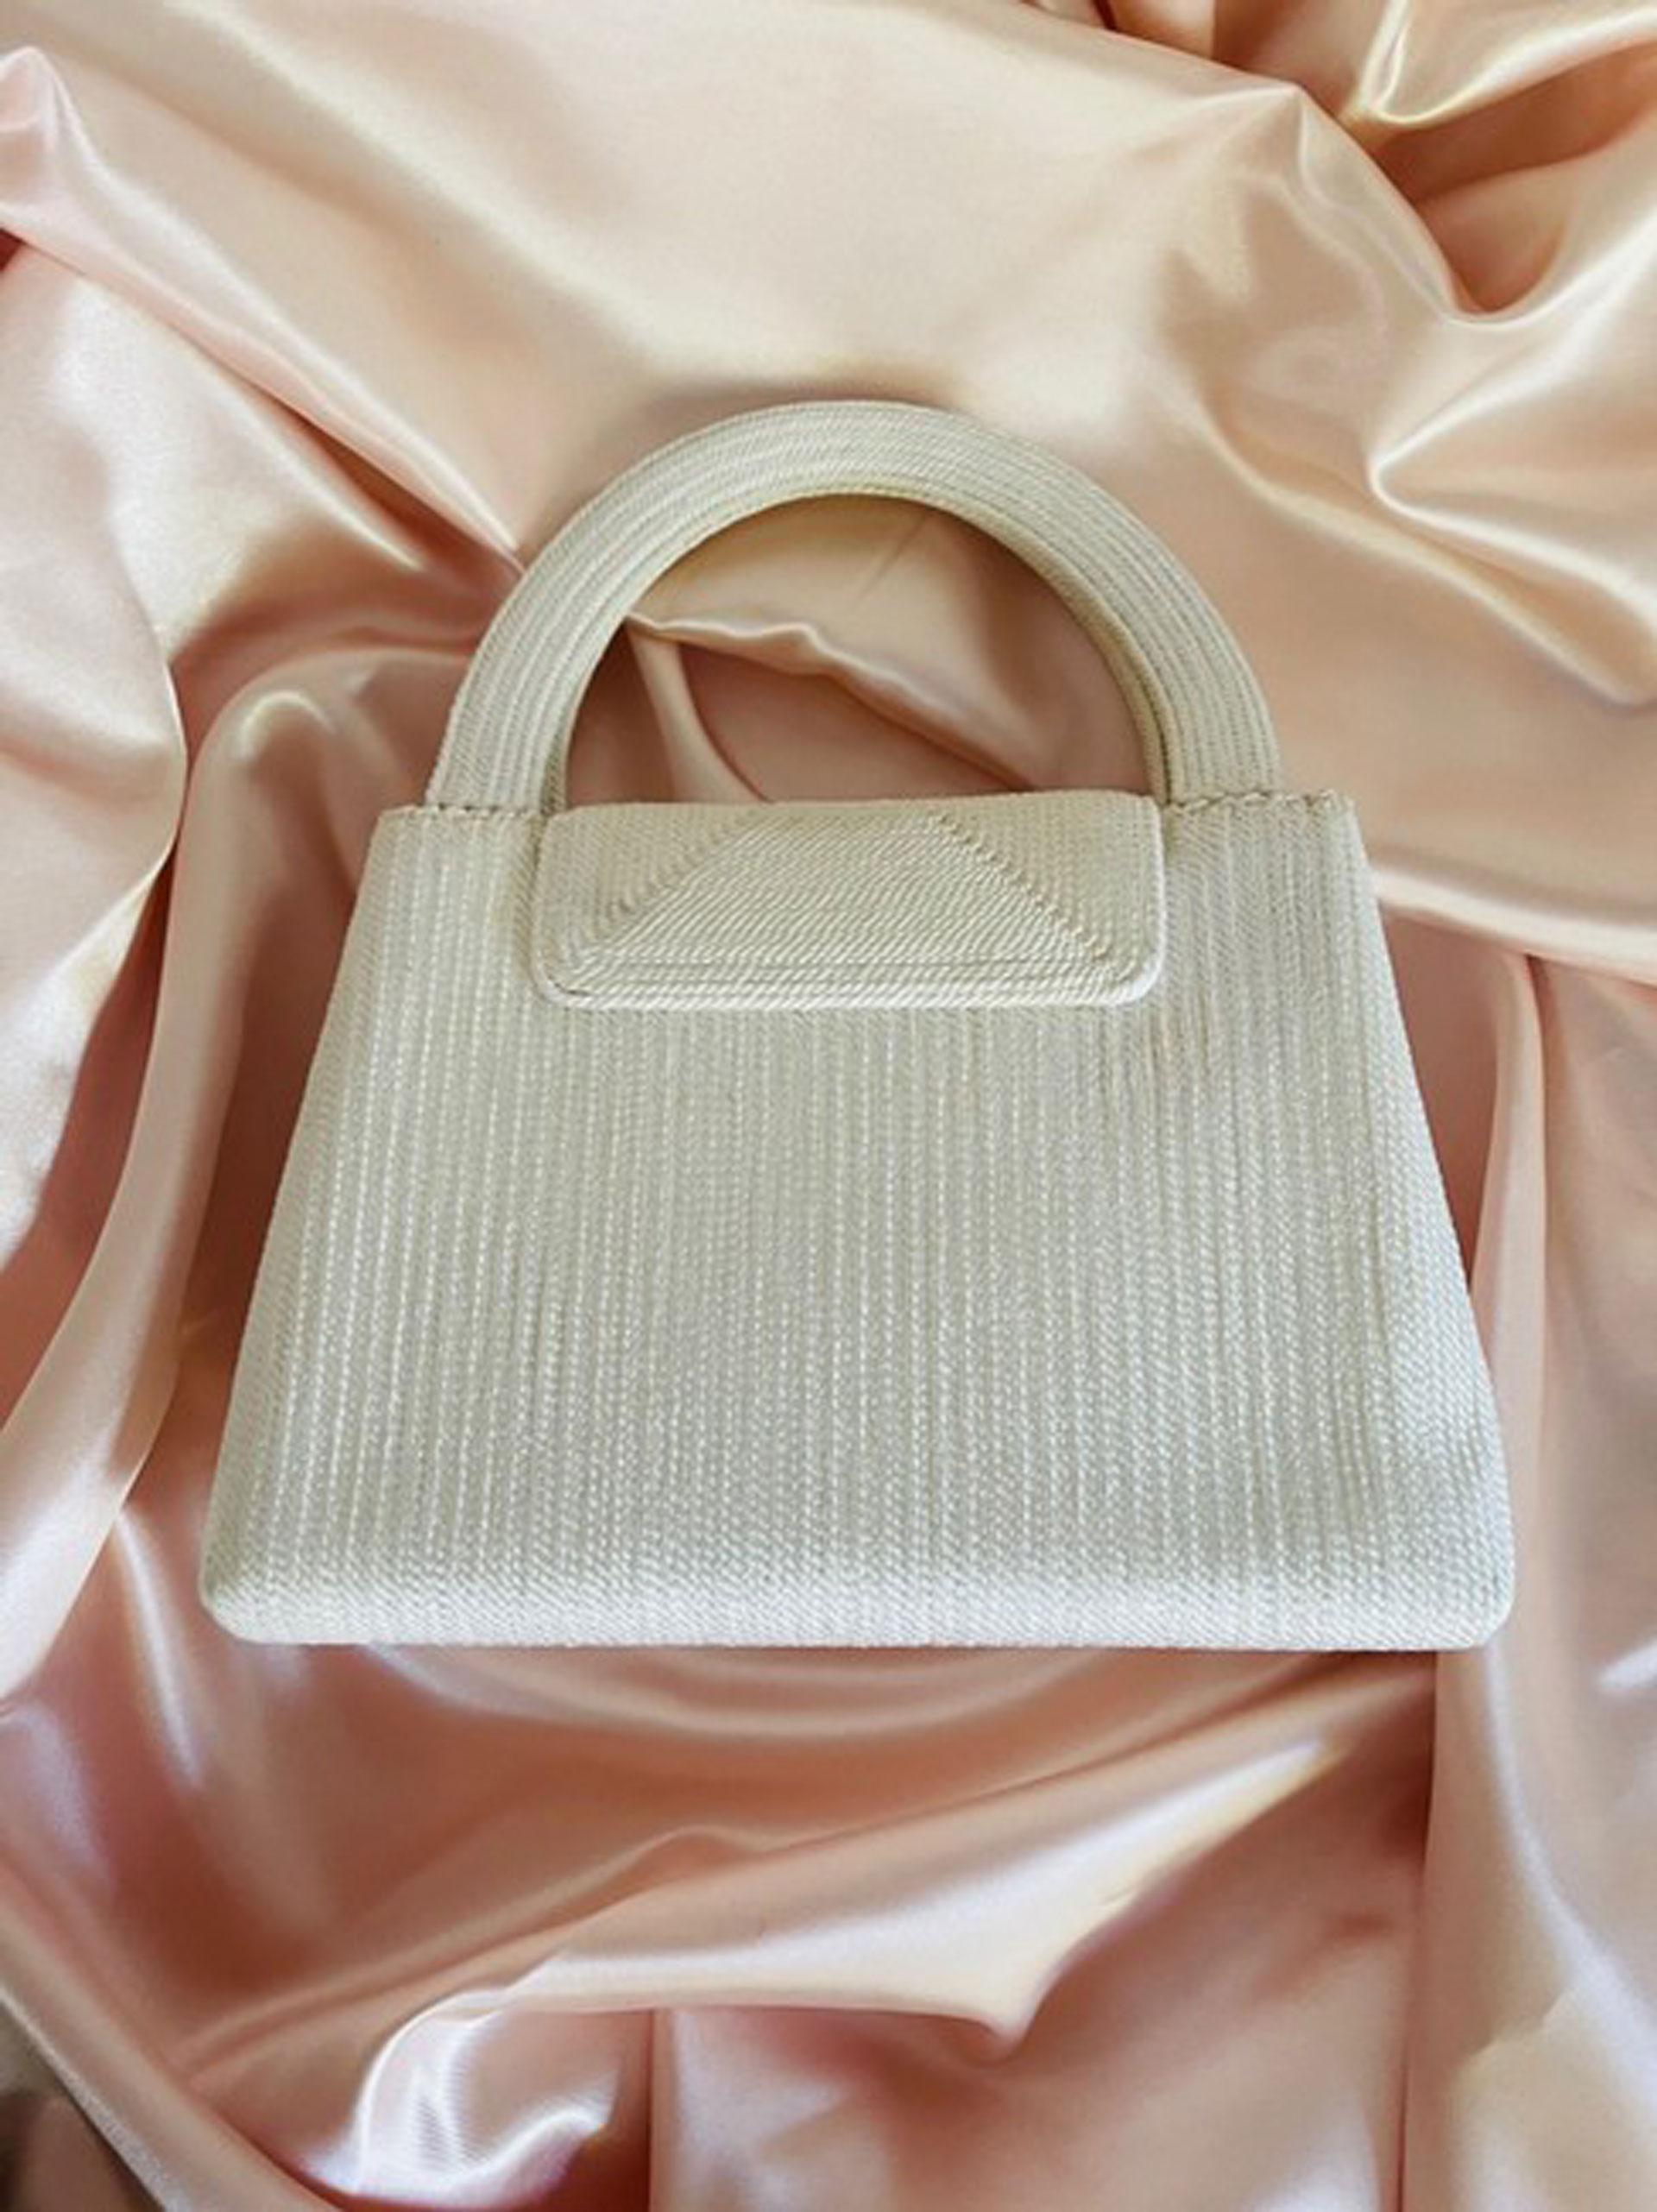 Chanel 1997 Rare Woven Silk Vintage Top Handle Off White Beige Kelly Flap Bag  For Sale 2